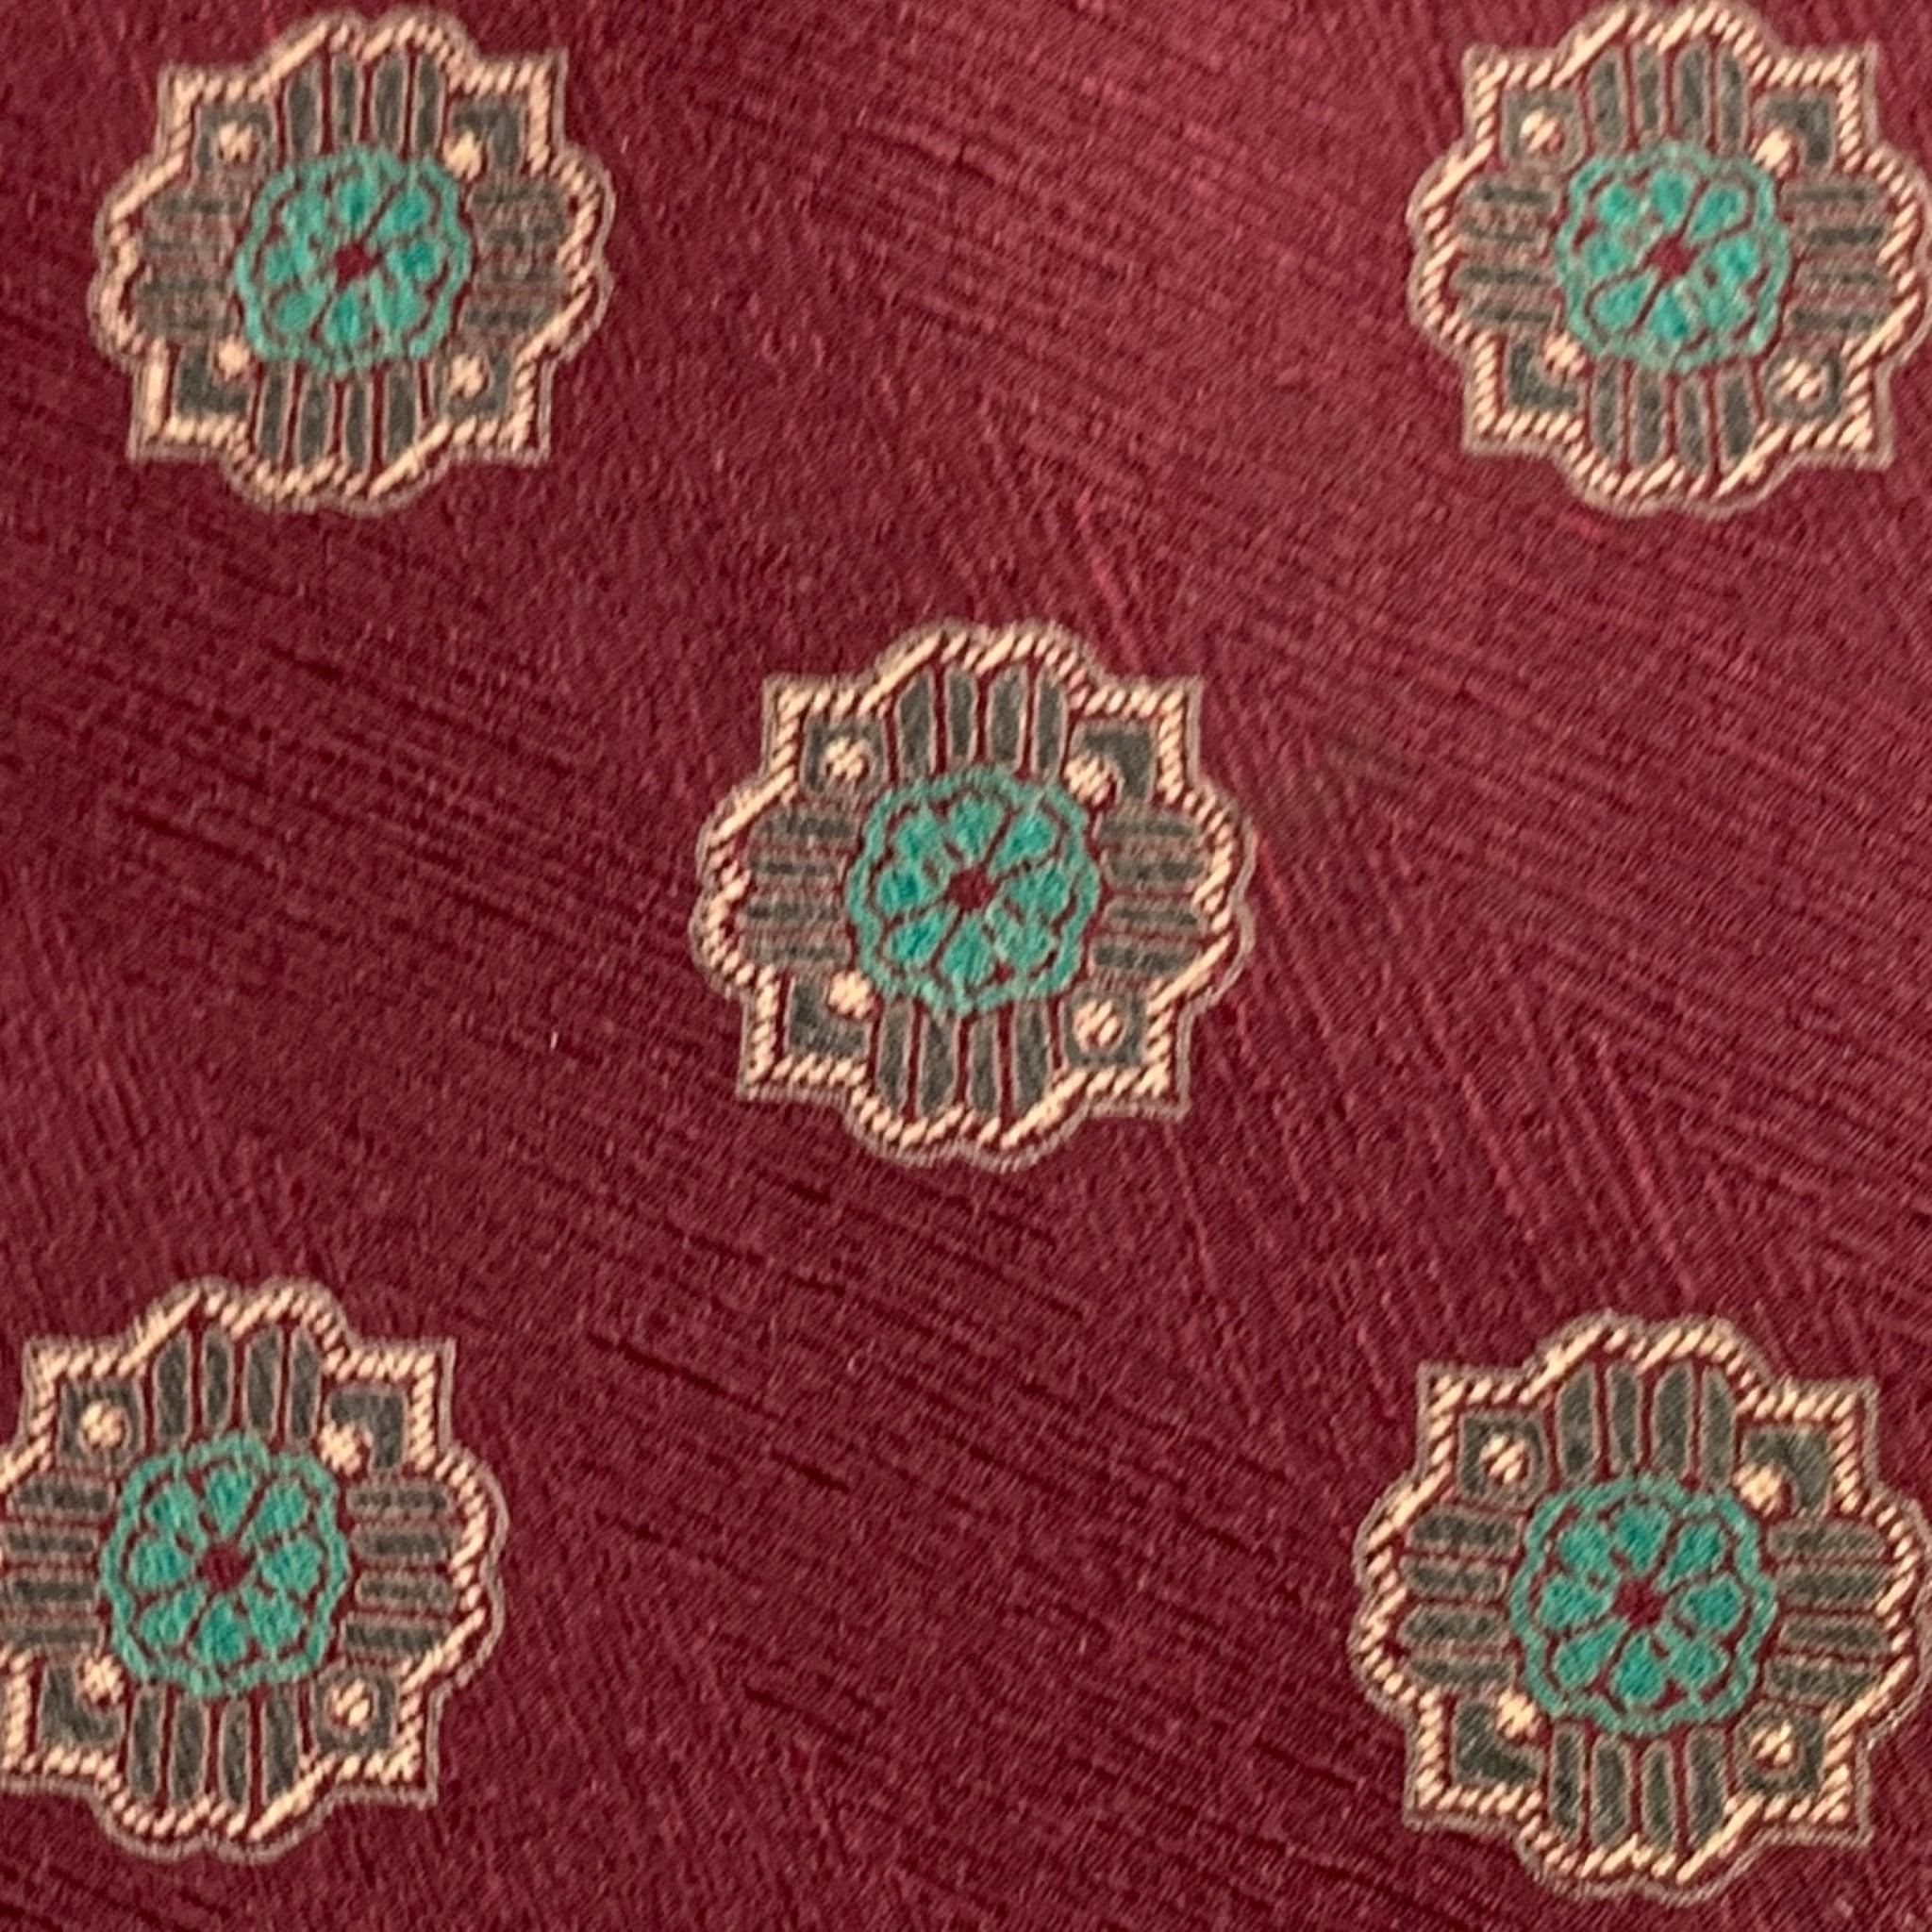 GIORGIO ARMANI Burgundy Green Abstract Floral Silk Tie In Good Condition For Sale In San Francisco, CA